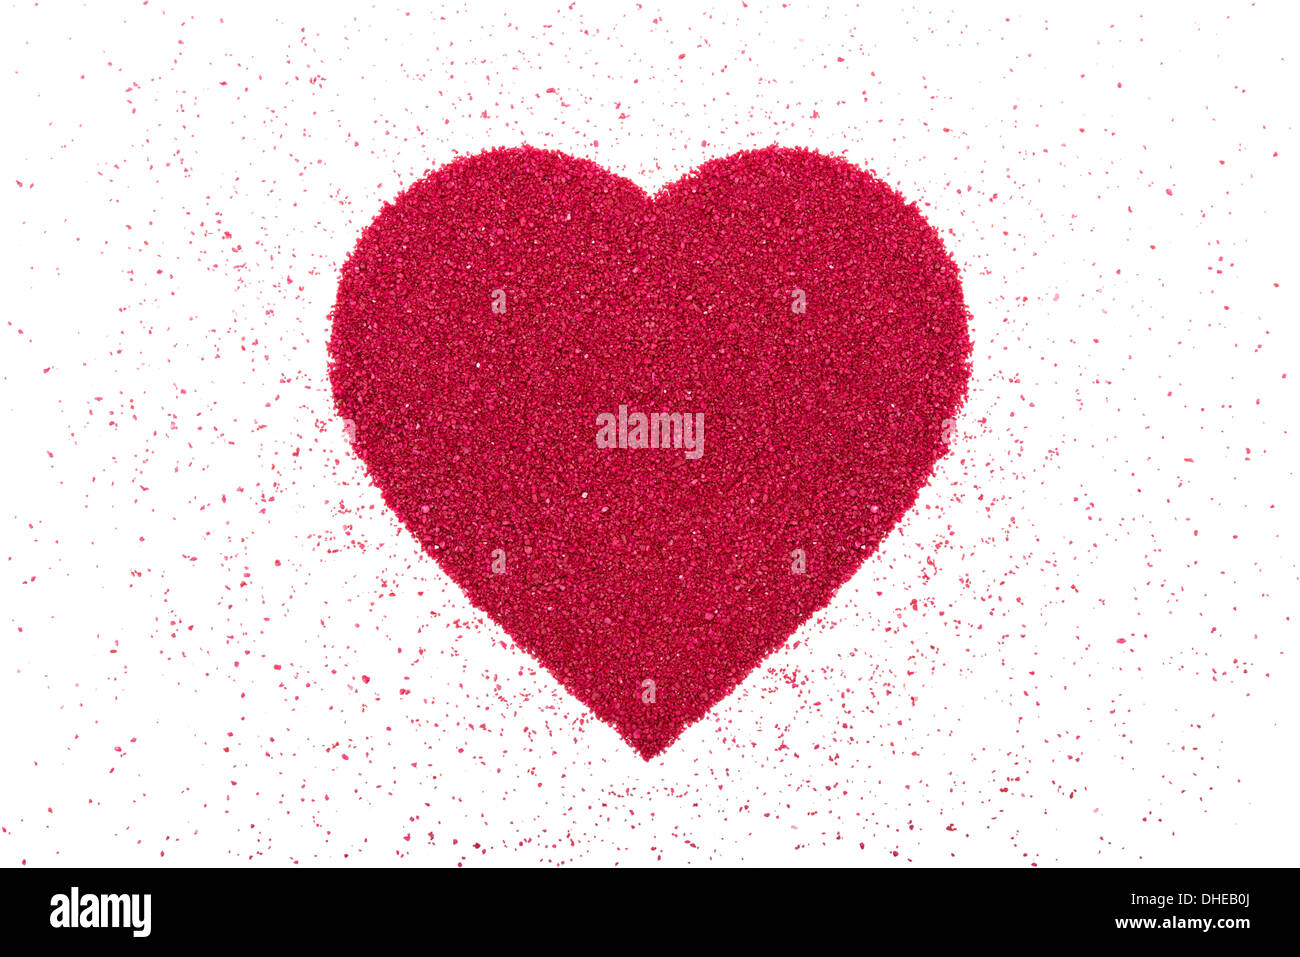 Heart made of decorative red sand is on a white background. Stock Photo